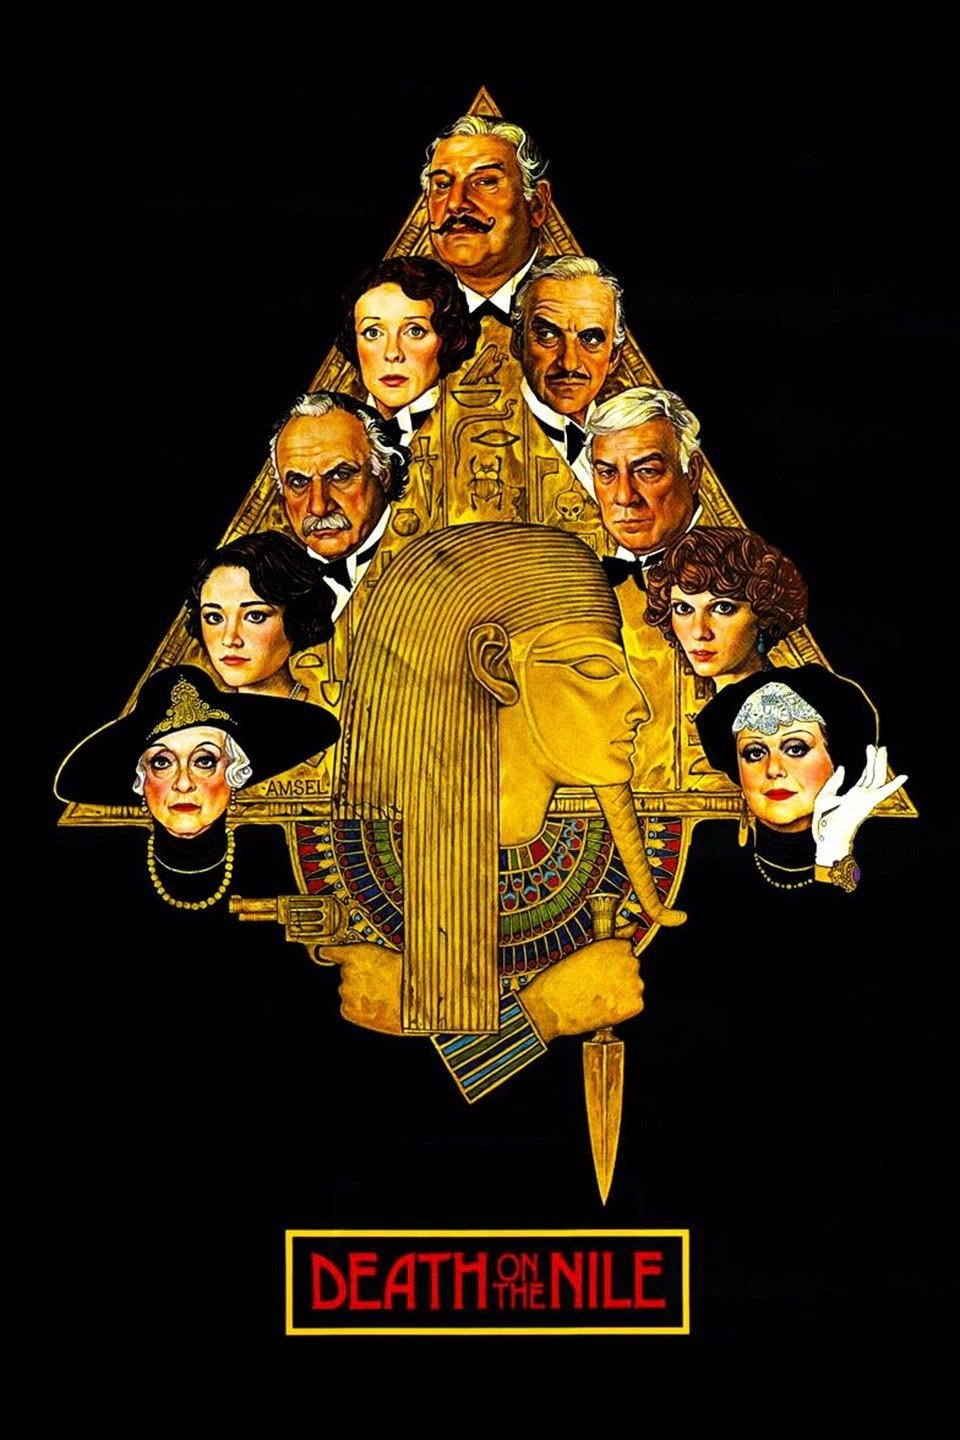 Death on the Nile (2022) Cast and Crew